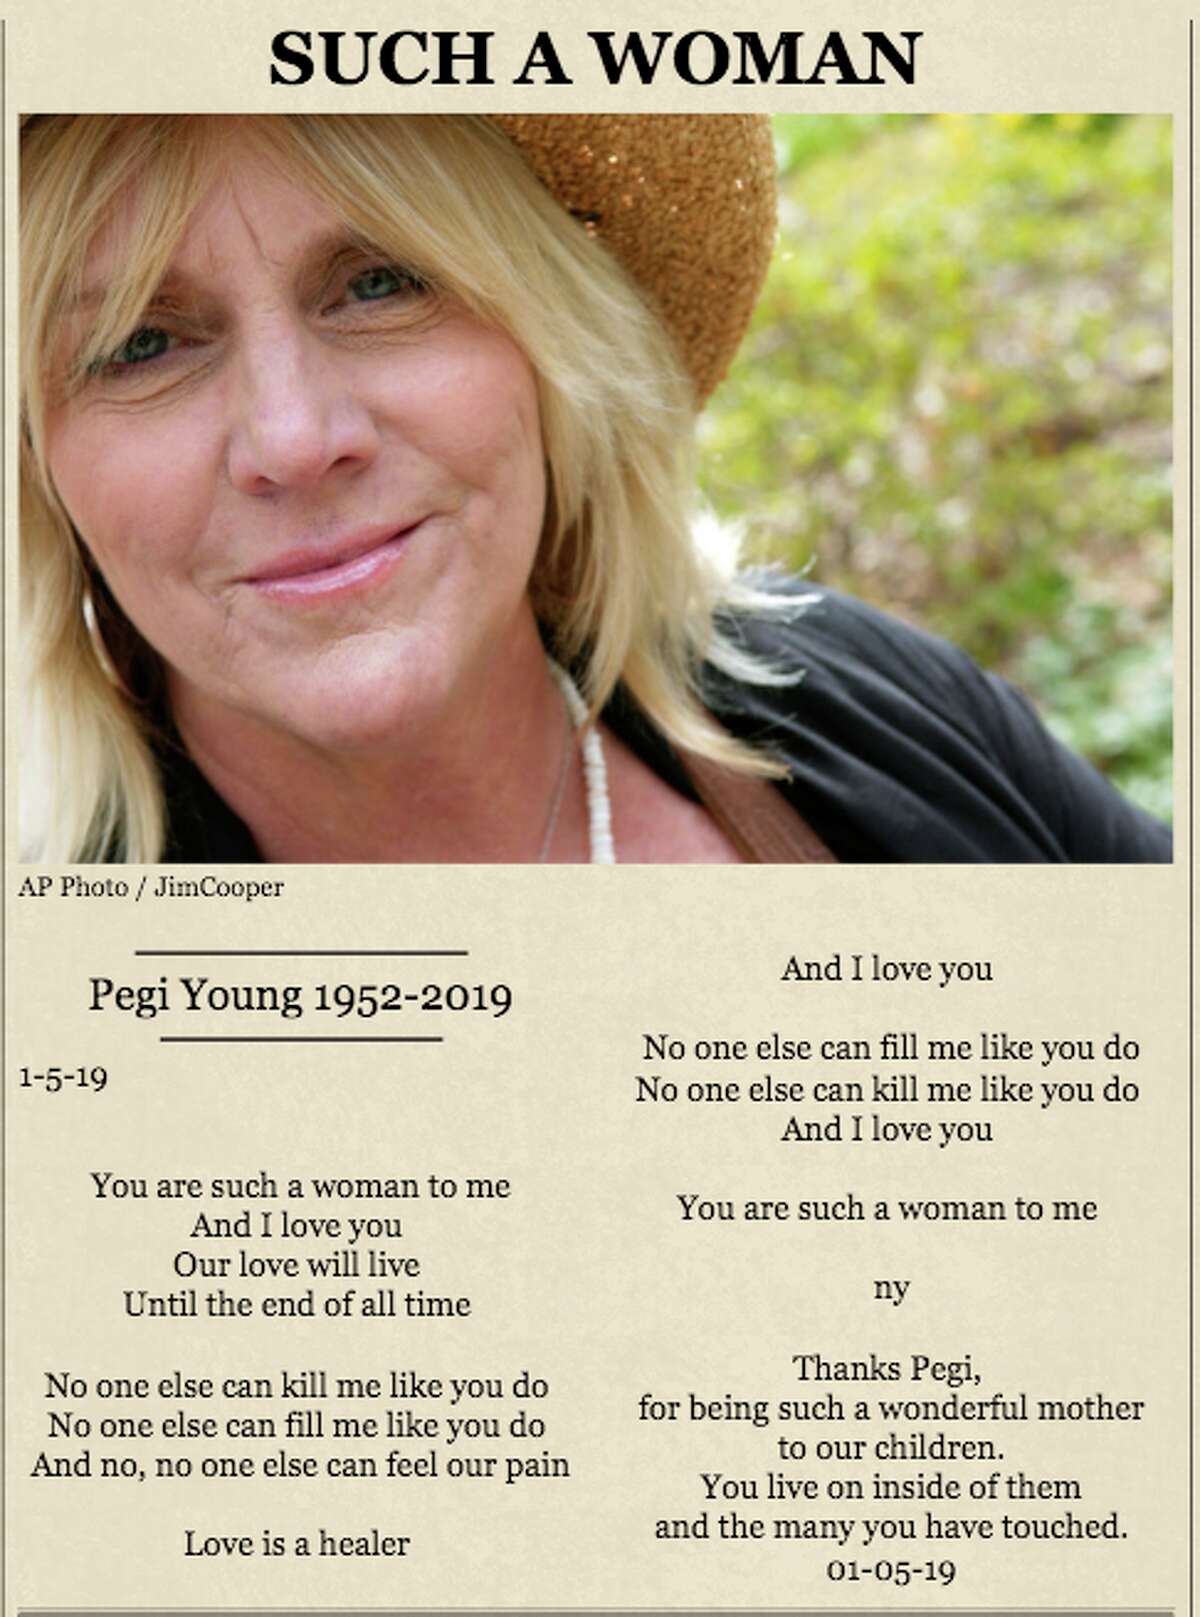 Musician Neil Young posted a touching tribute neilyoungarchives.com to his ex-wife Pegi Young who died on New Year's Day after a battle with cancer.